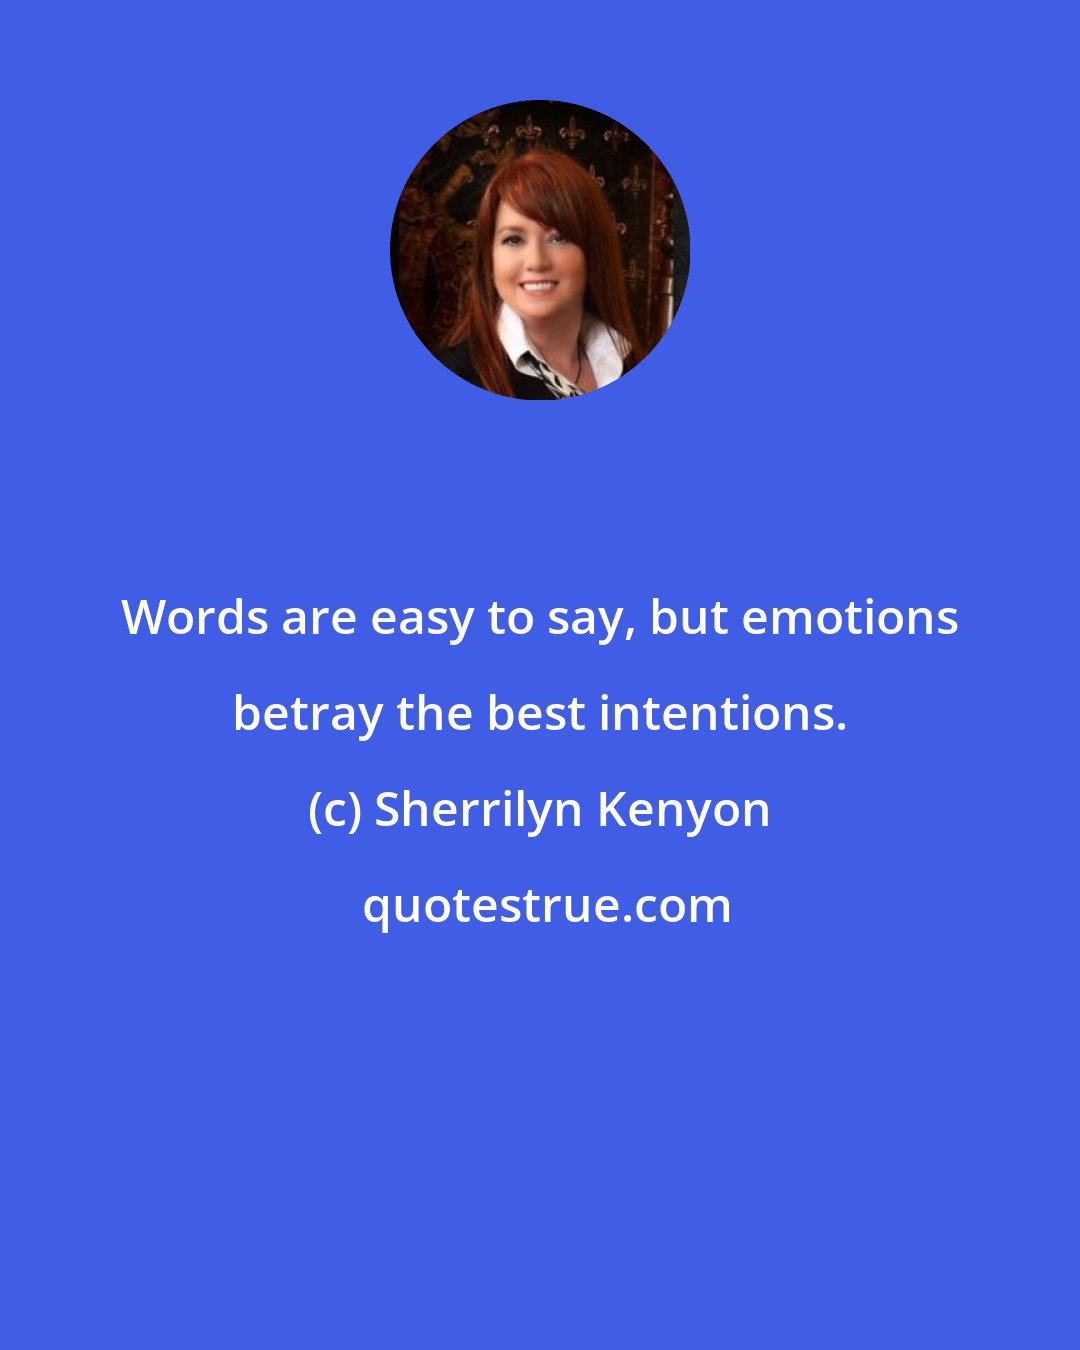 Sherrilyn Kenyon: Words are easy to say, but emotions betray the best intentions.